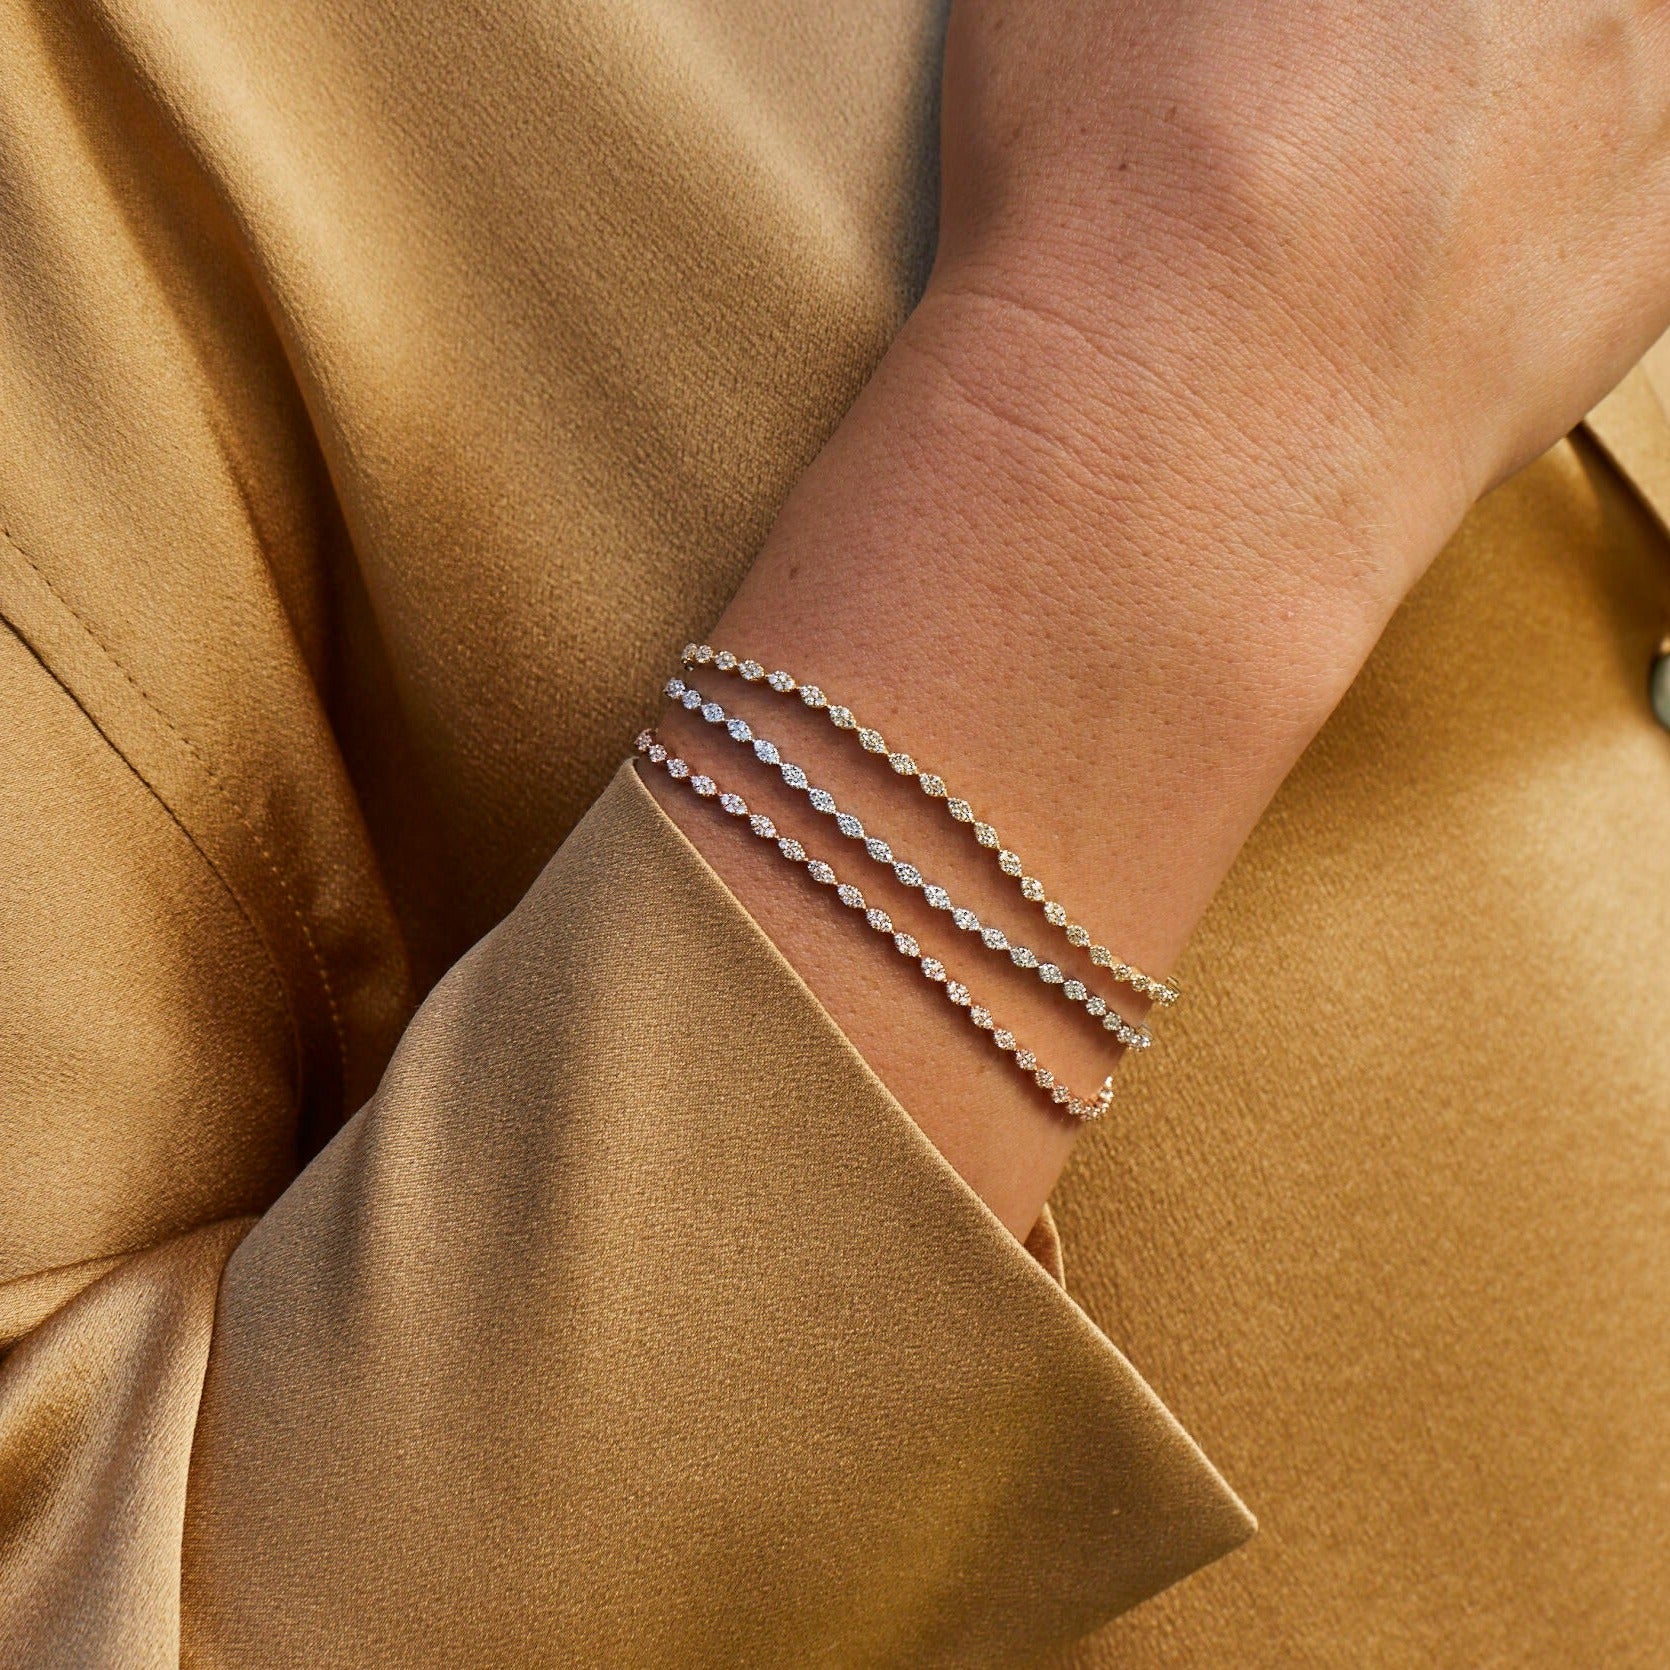 Pavé Diamond Marquise Eternity Bracelet in yellow gold, rose gold, and white gold styled on wrist of model